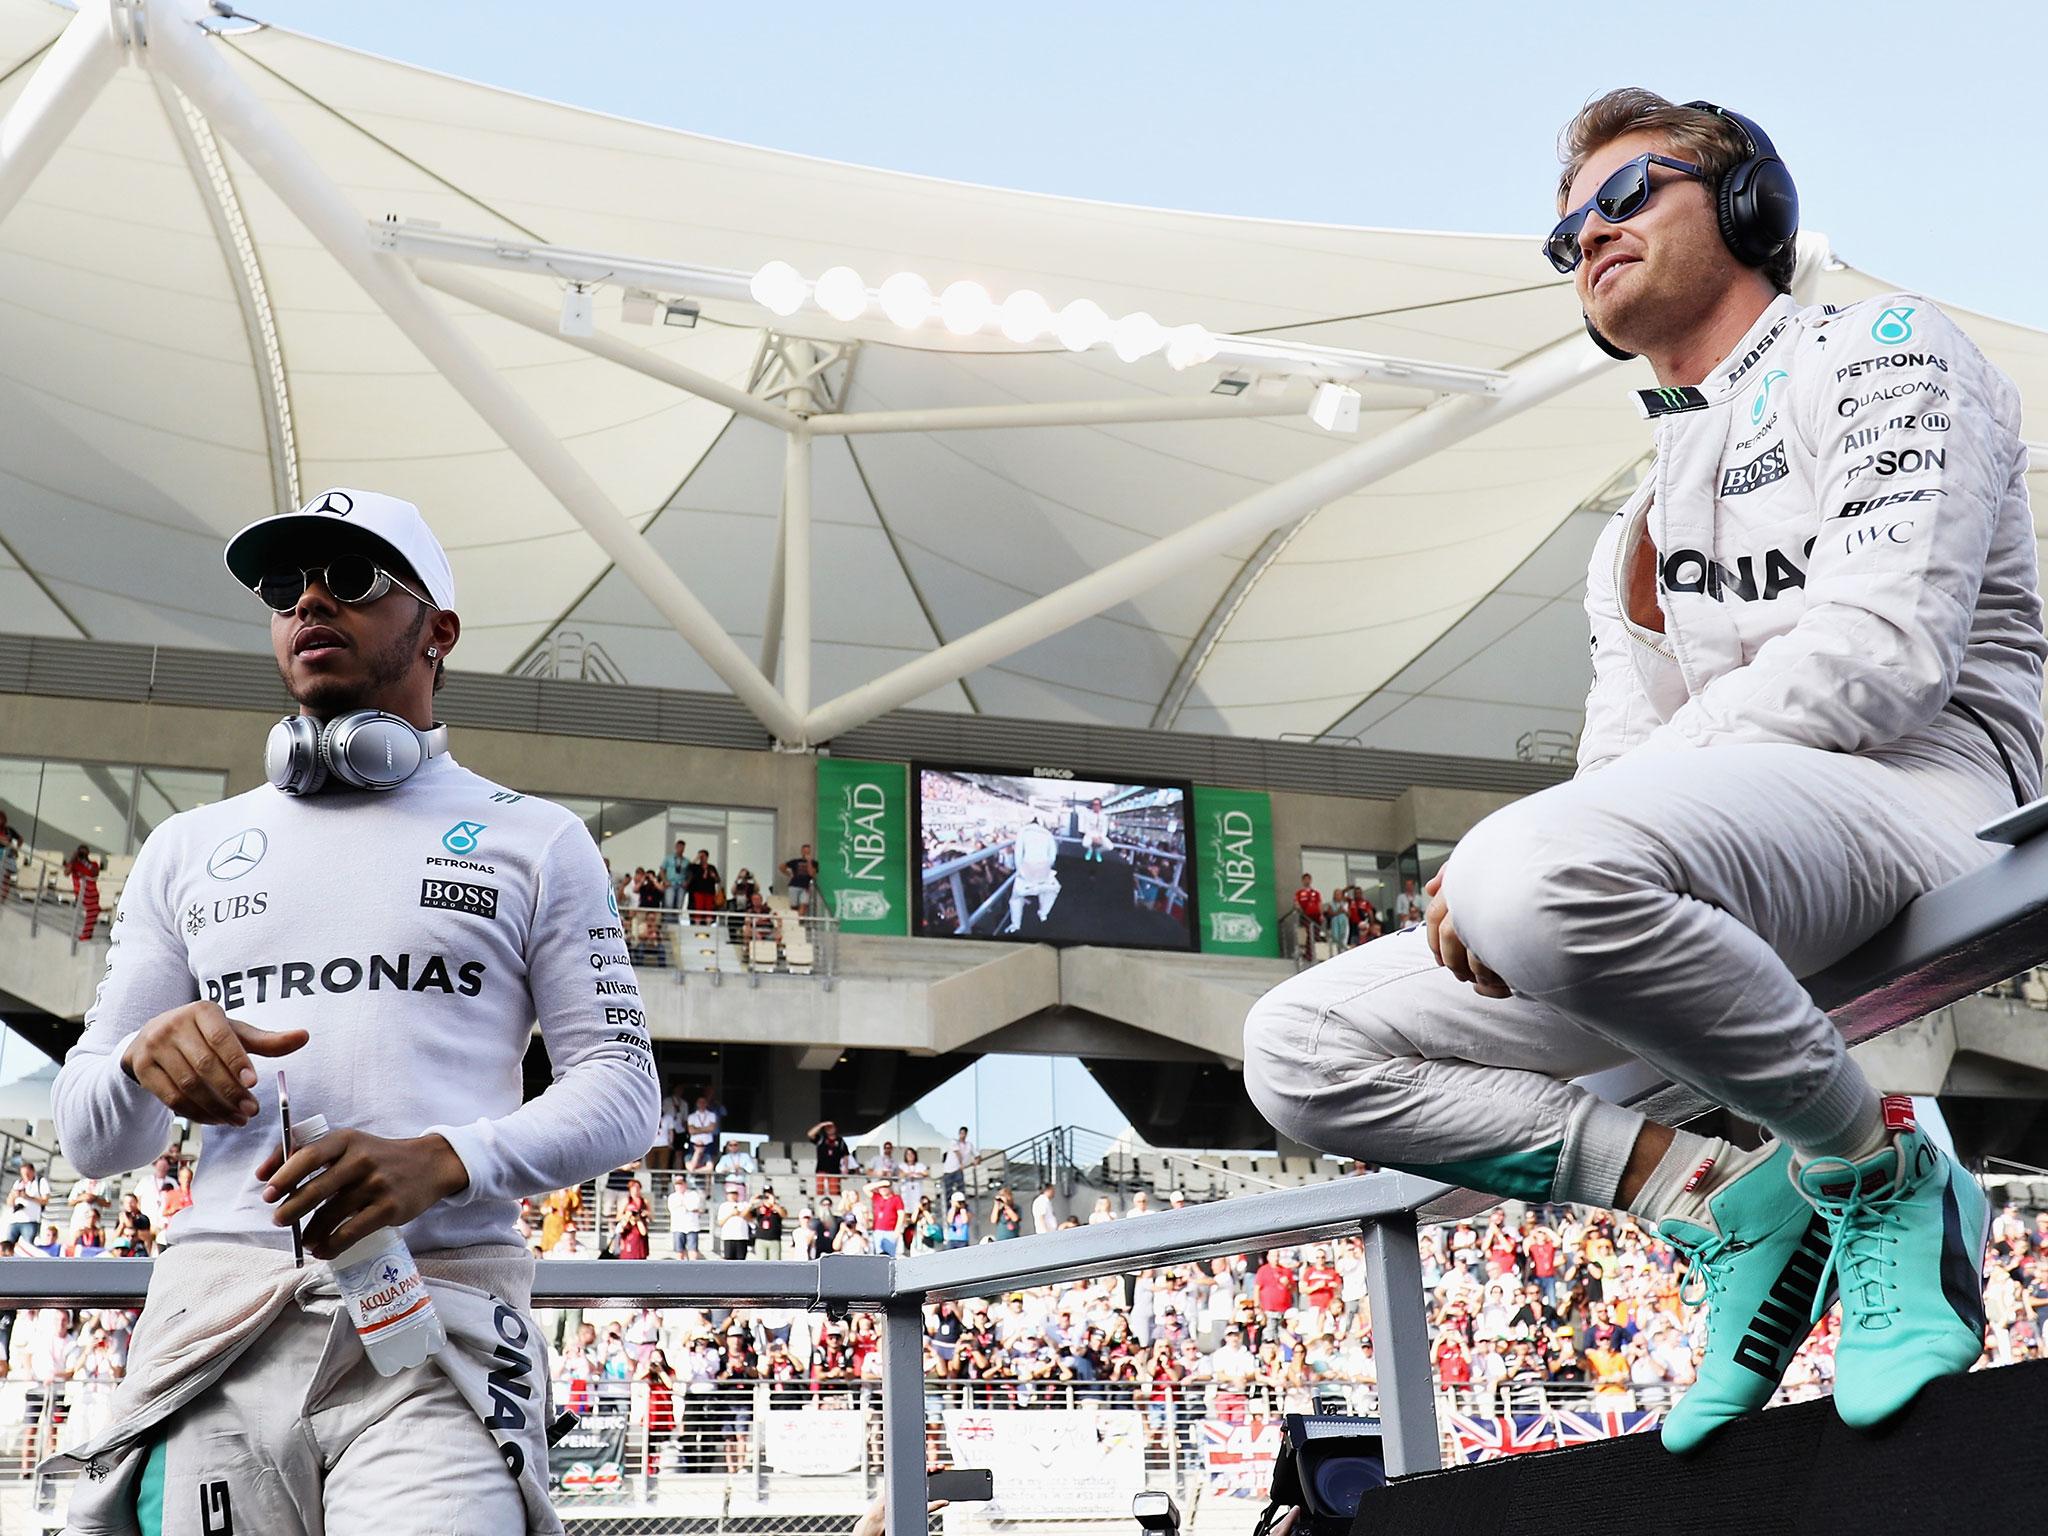 Rosberg ended up on top in his long rivalry with Hamilton